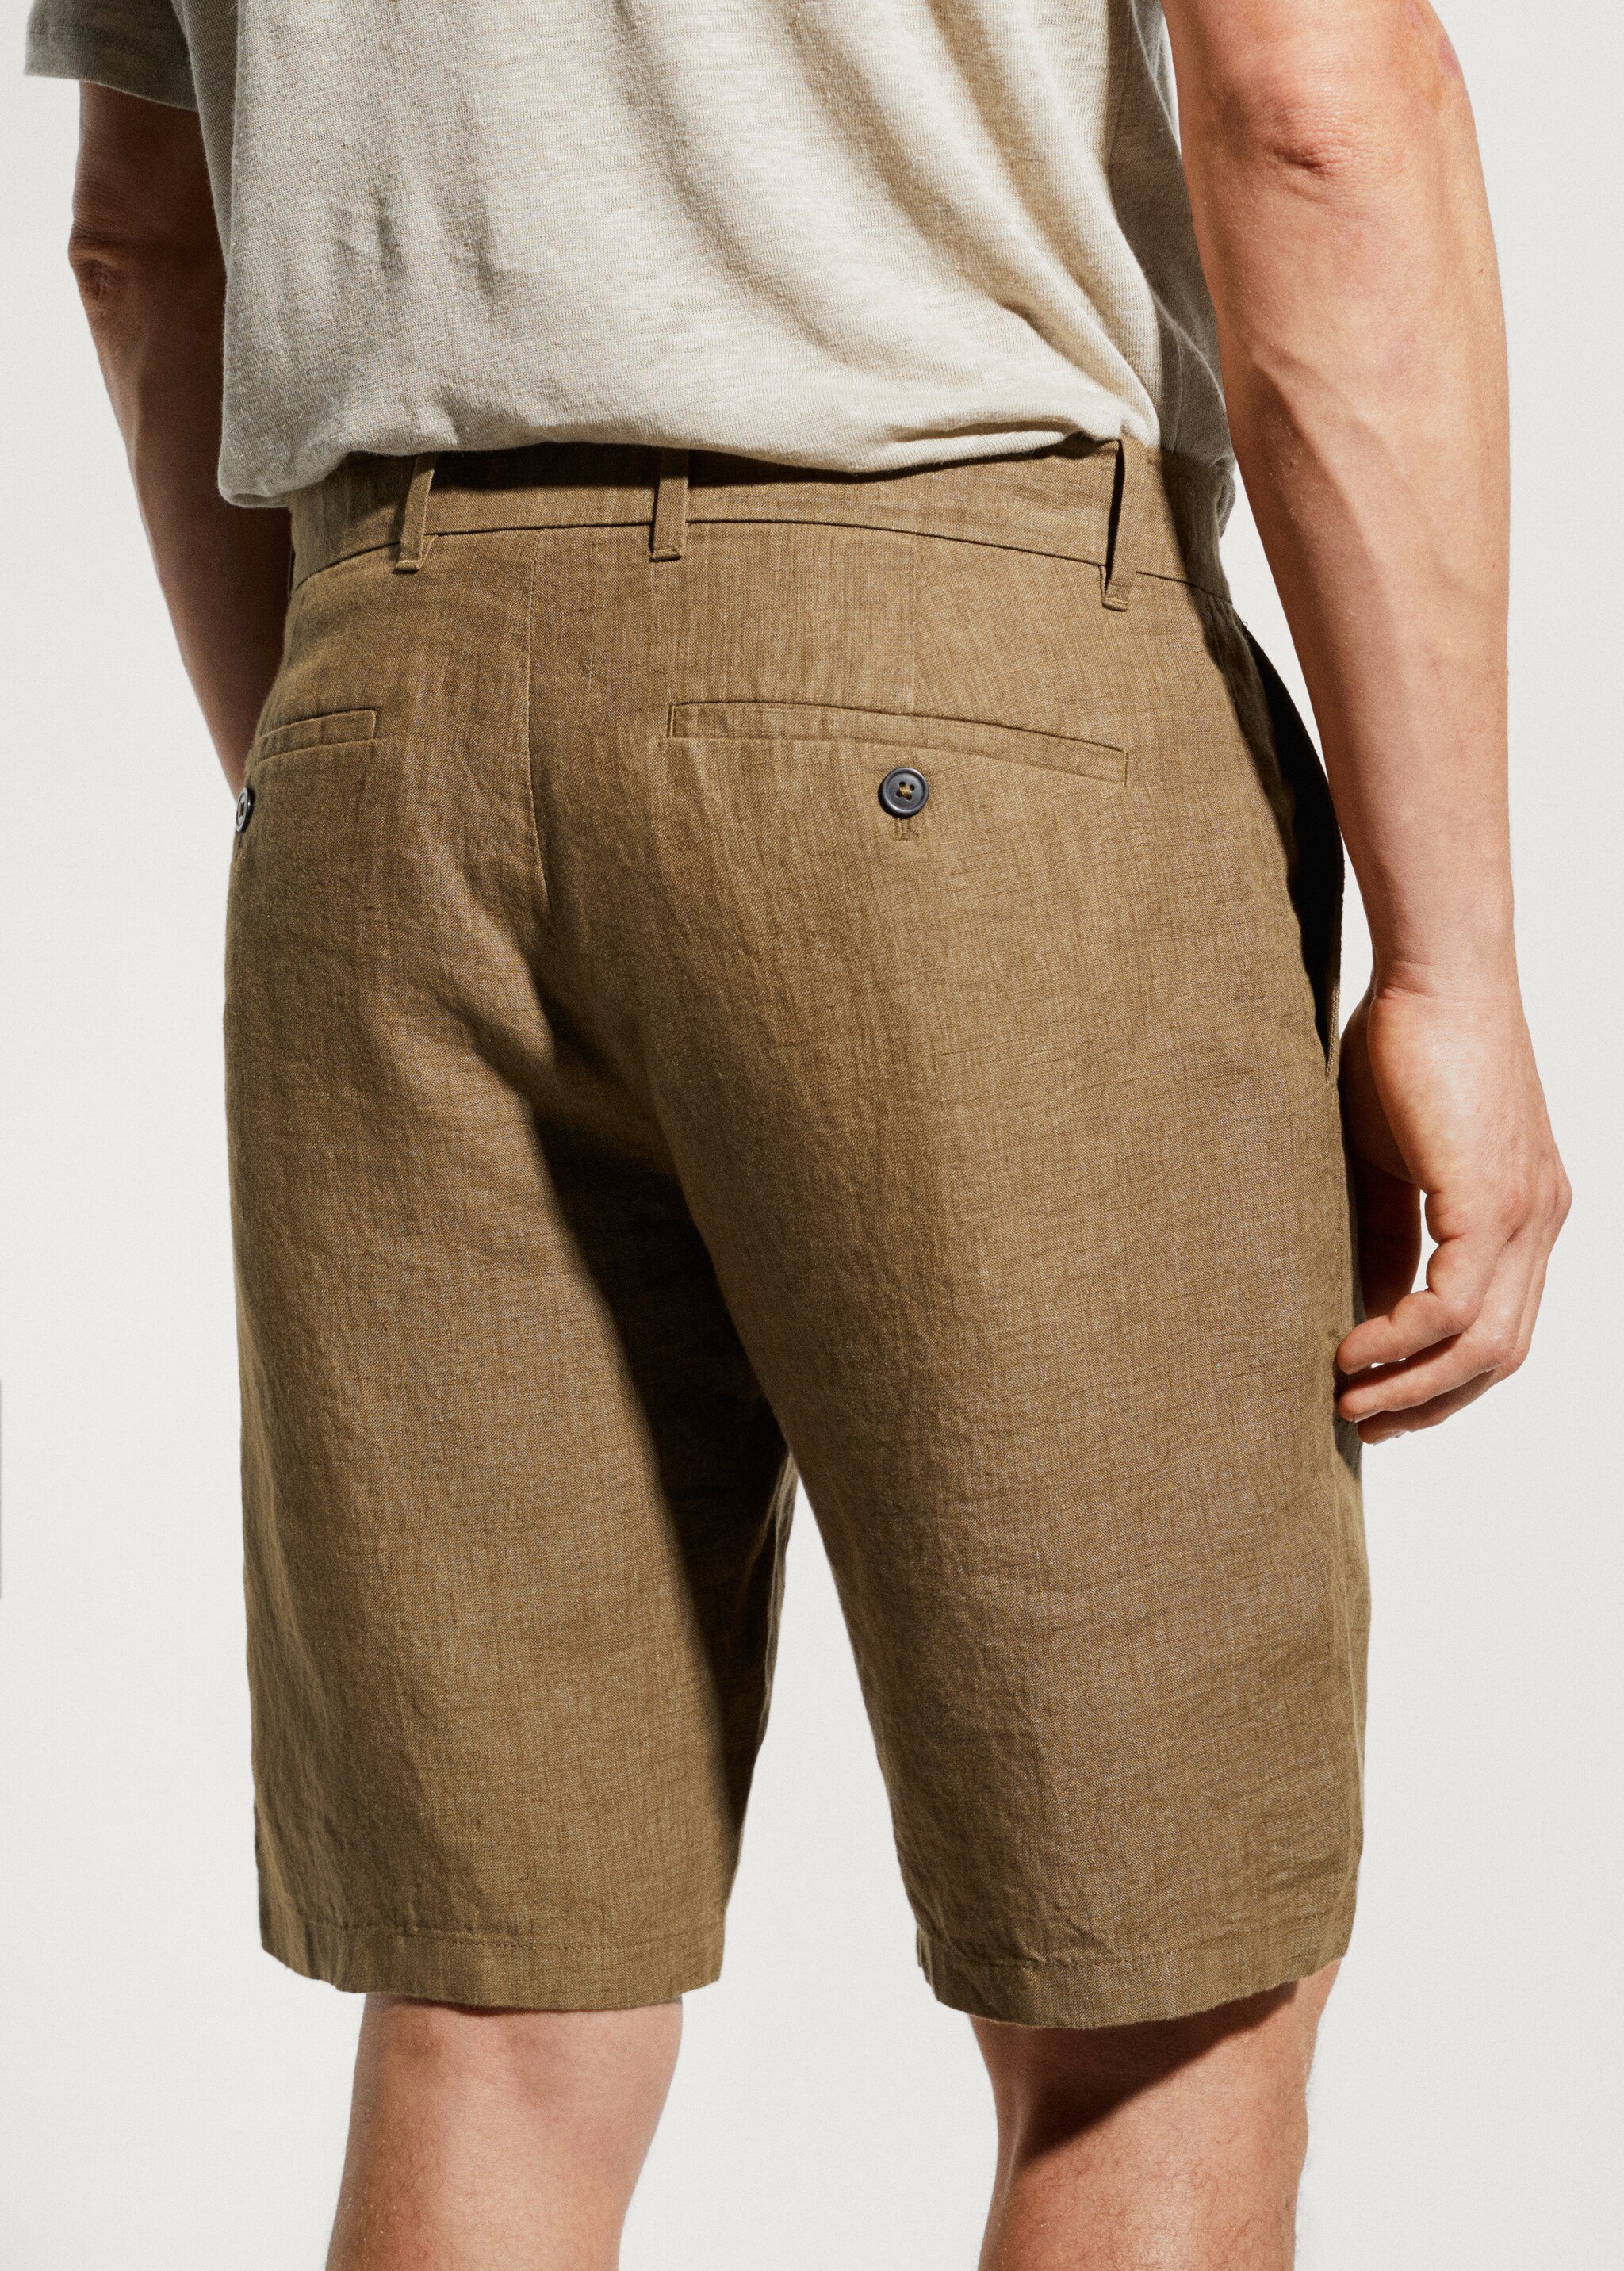 100% linen shorts - Details of the article 6